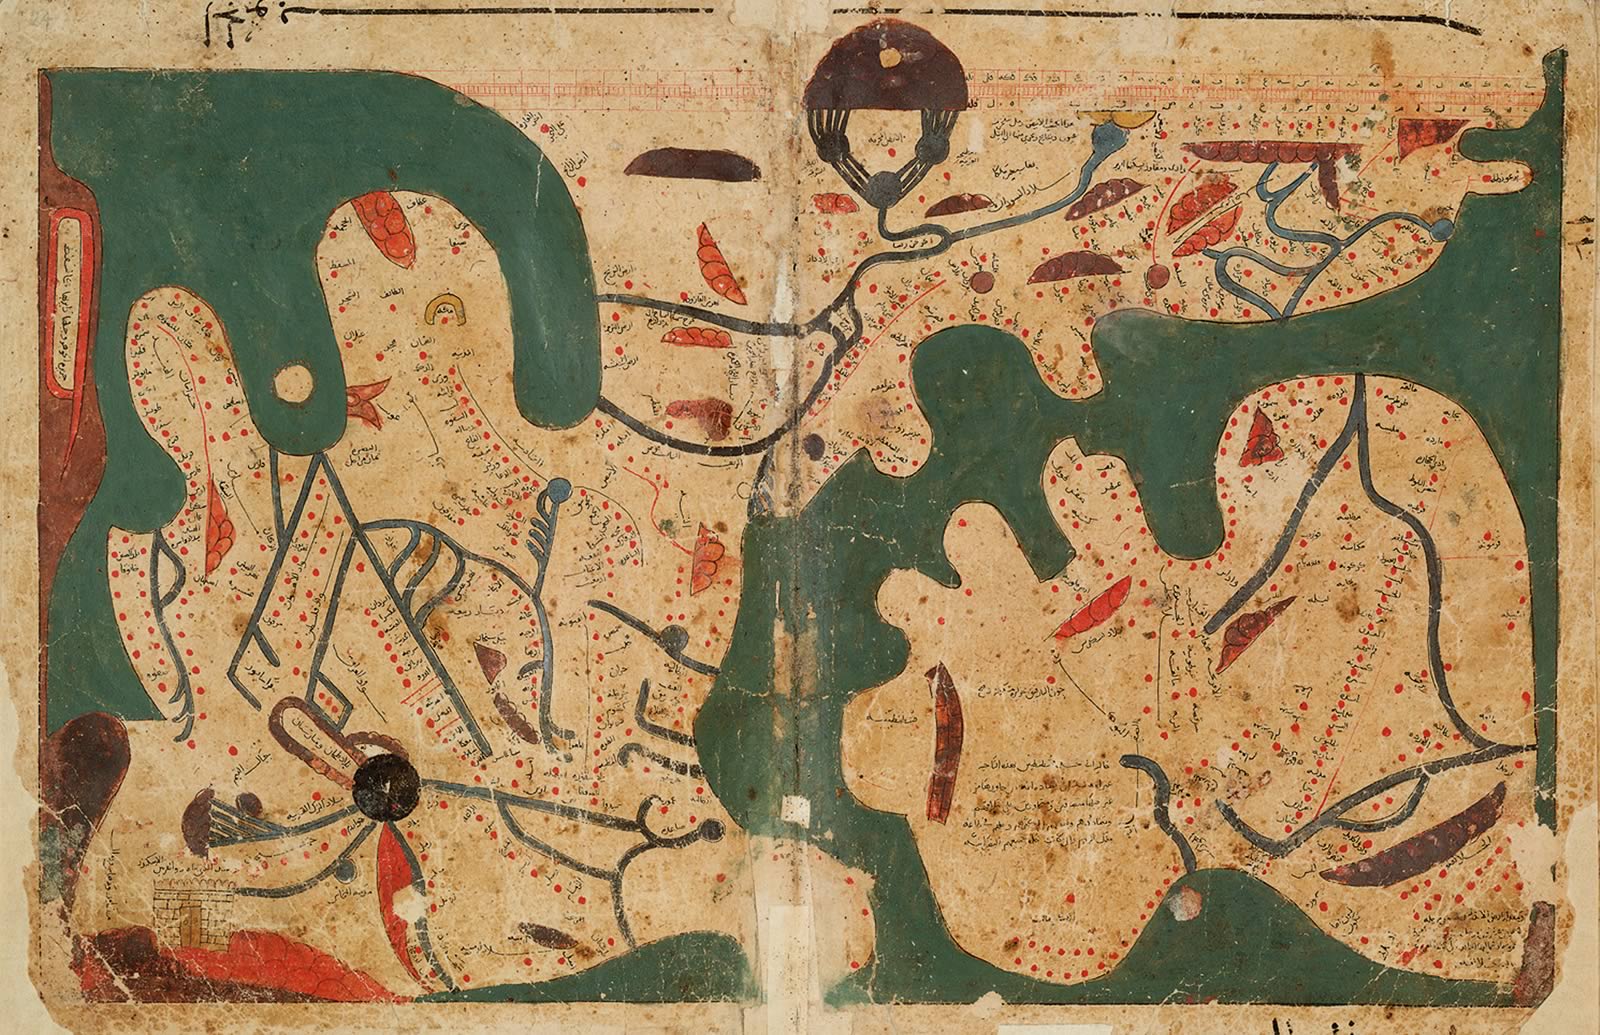 The original of this world map was likely drawn in the 12th century CE.